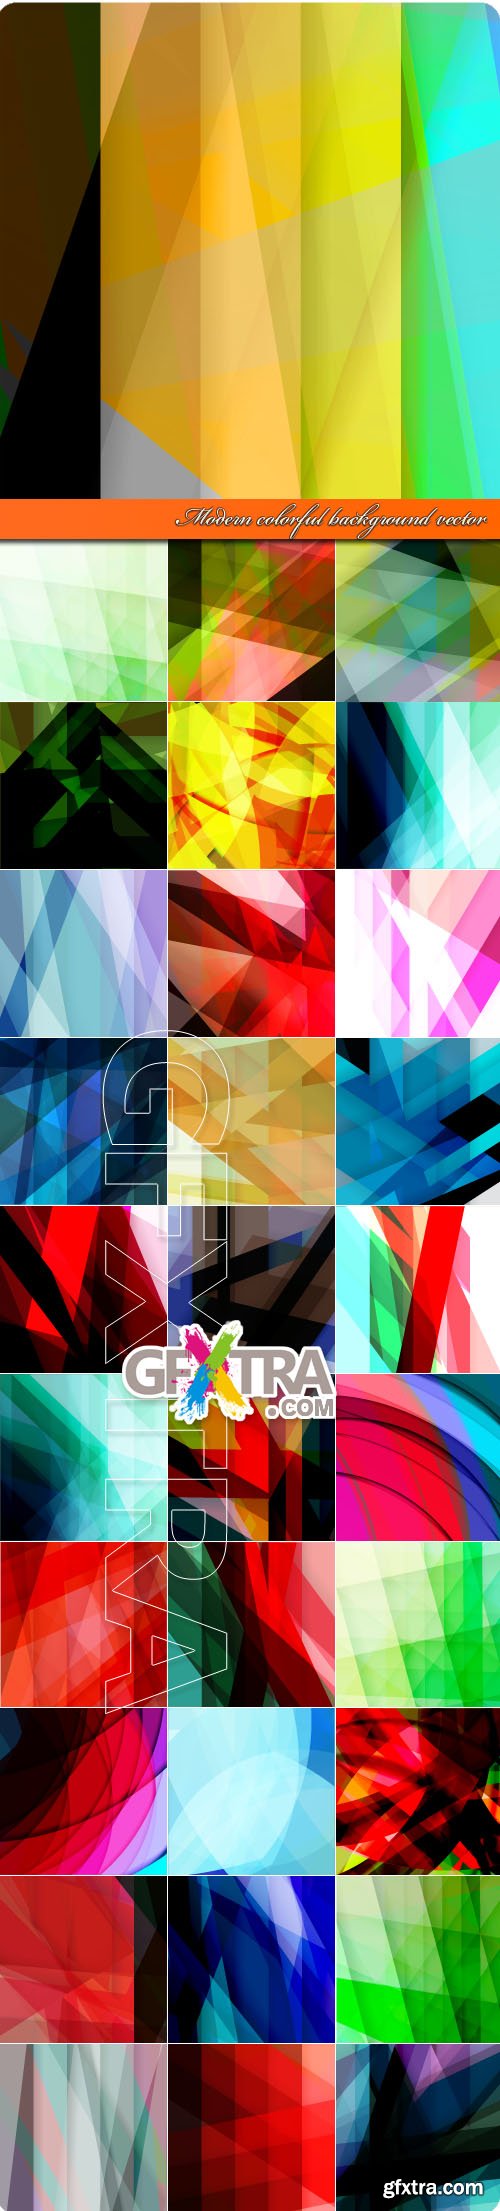 Modern colorful background vector